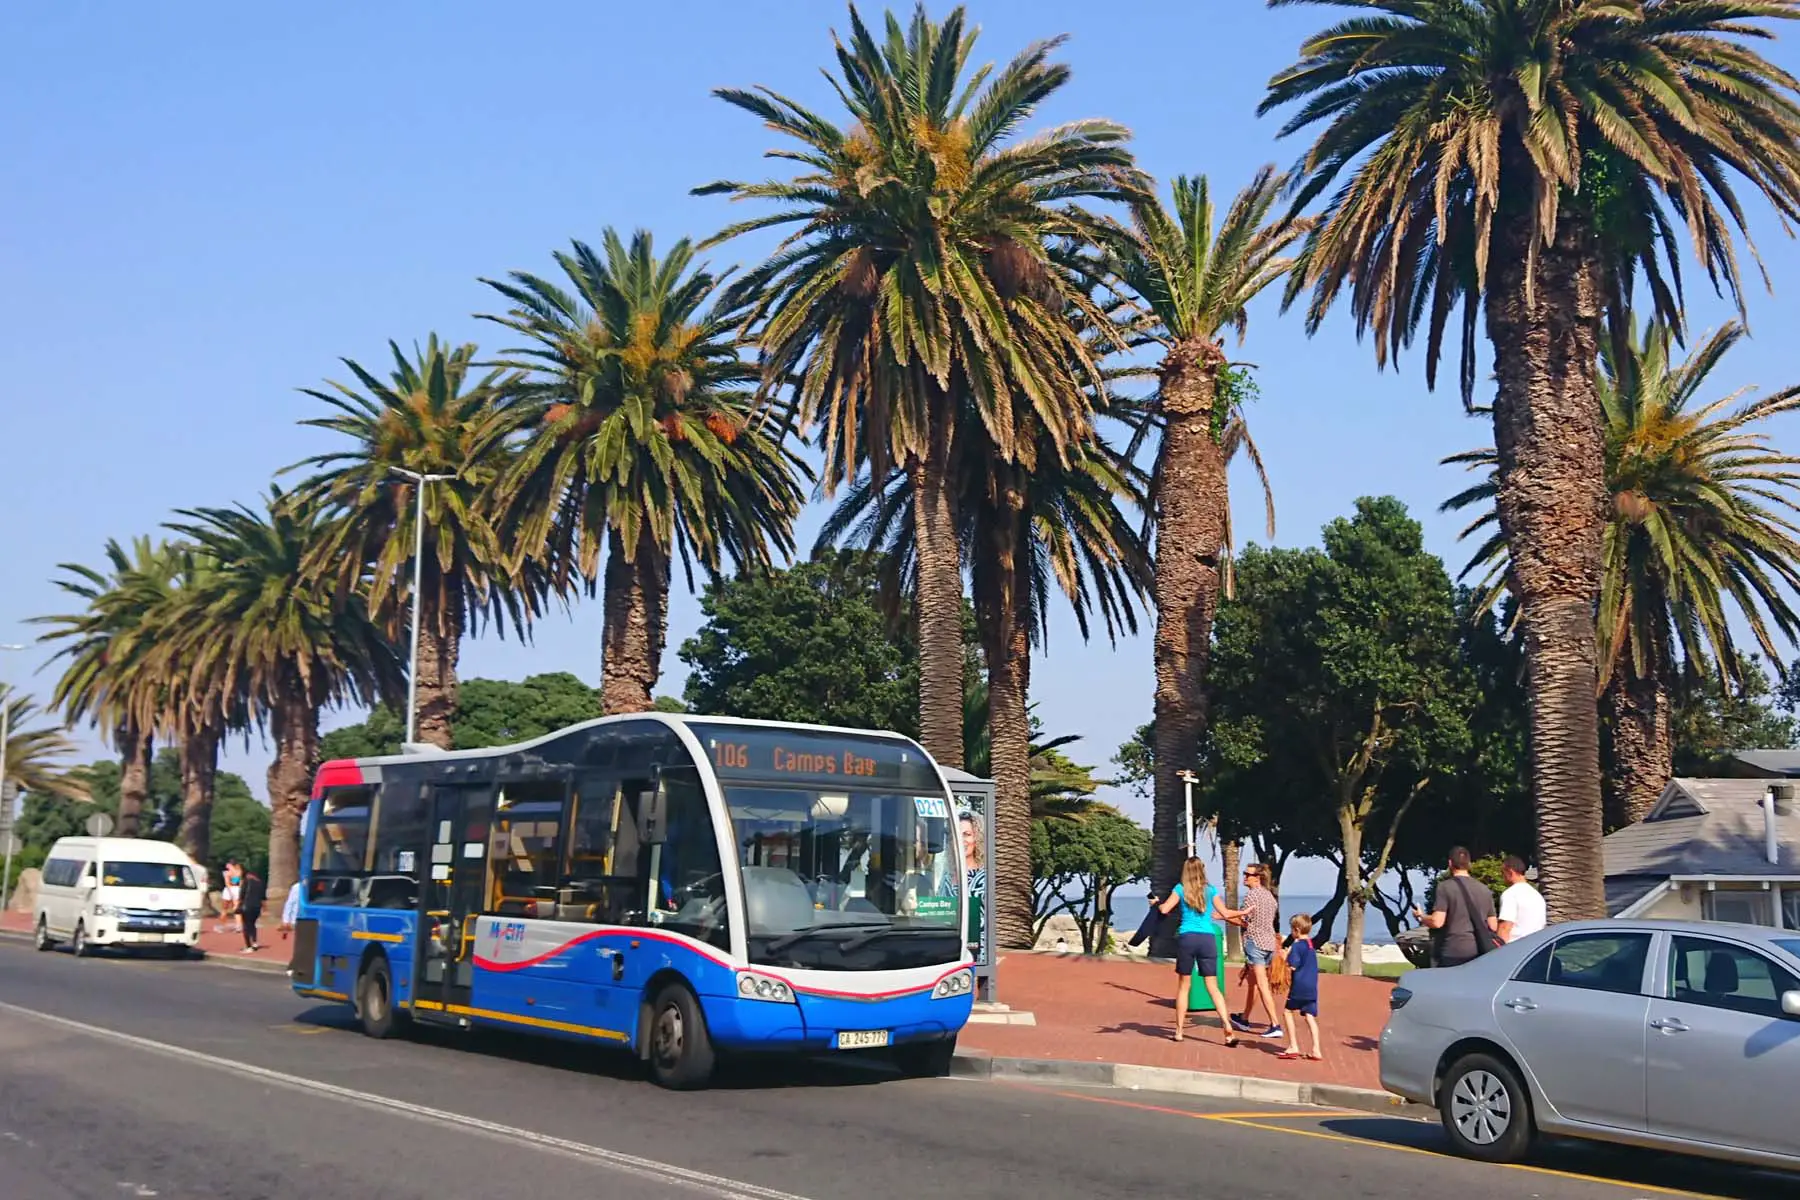 bus pulling into a bus stop in Cape Town